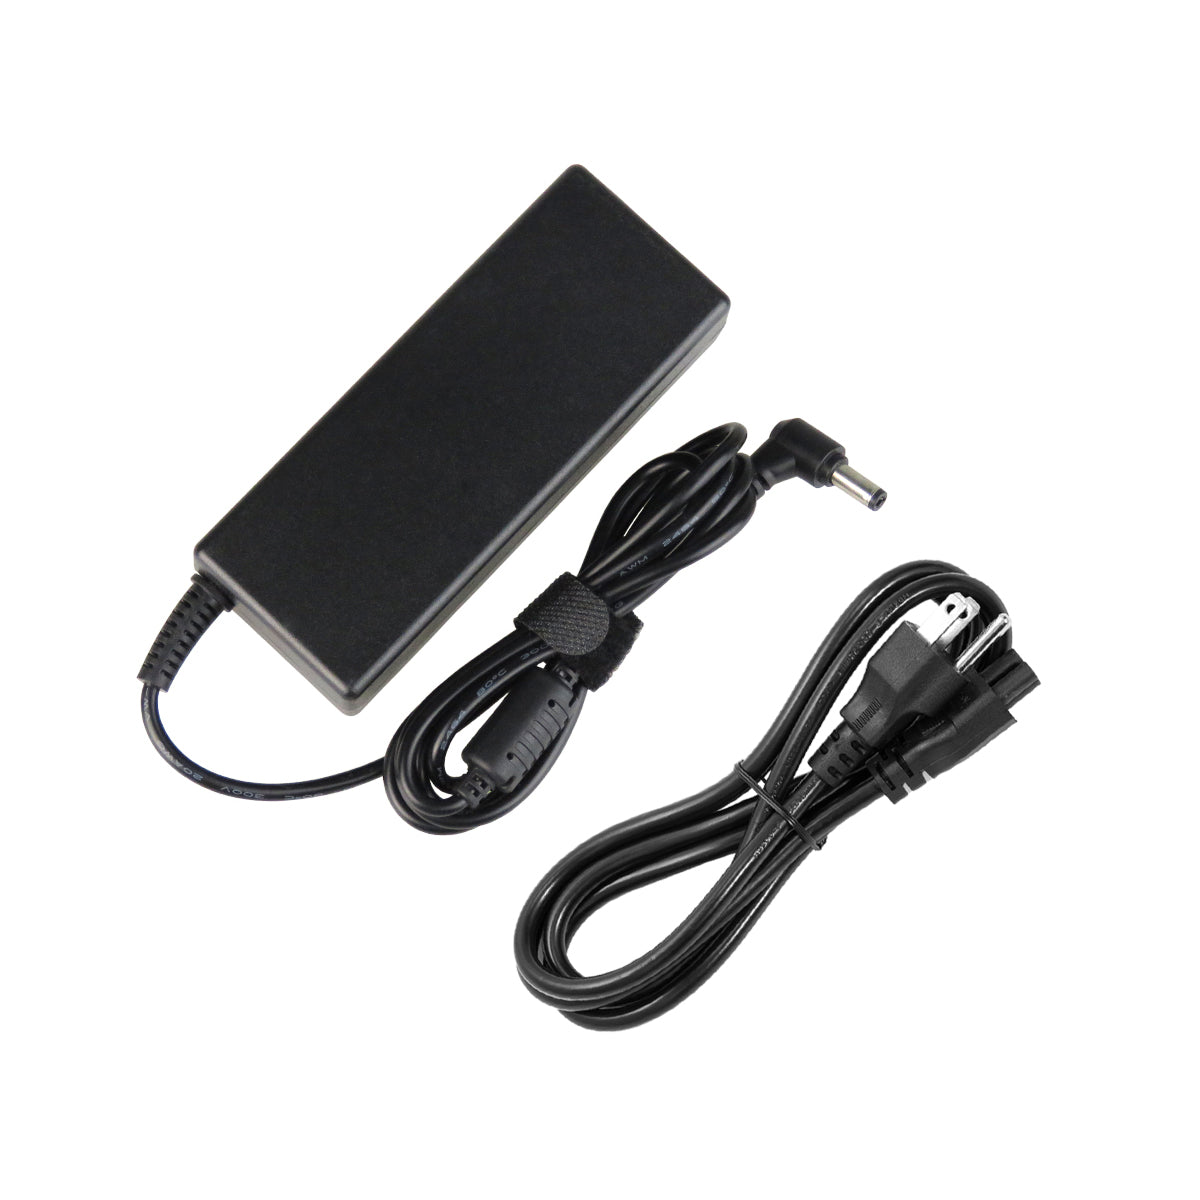 AC Adapter Charger for Lenovo IdeaPad Z570 Notebook.